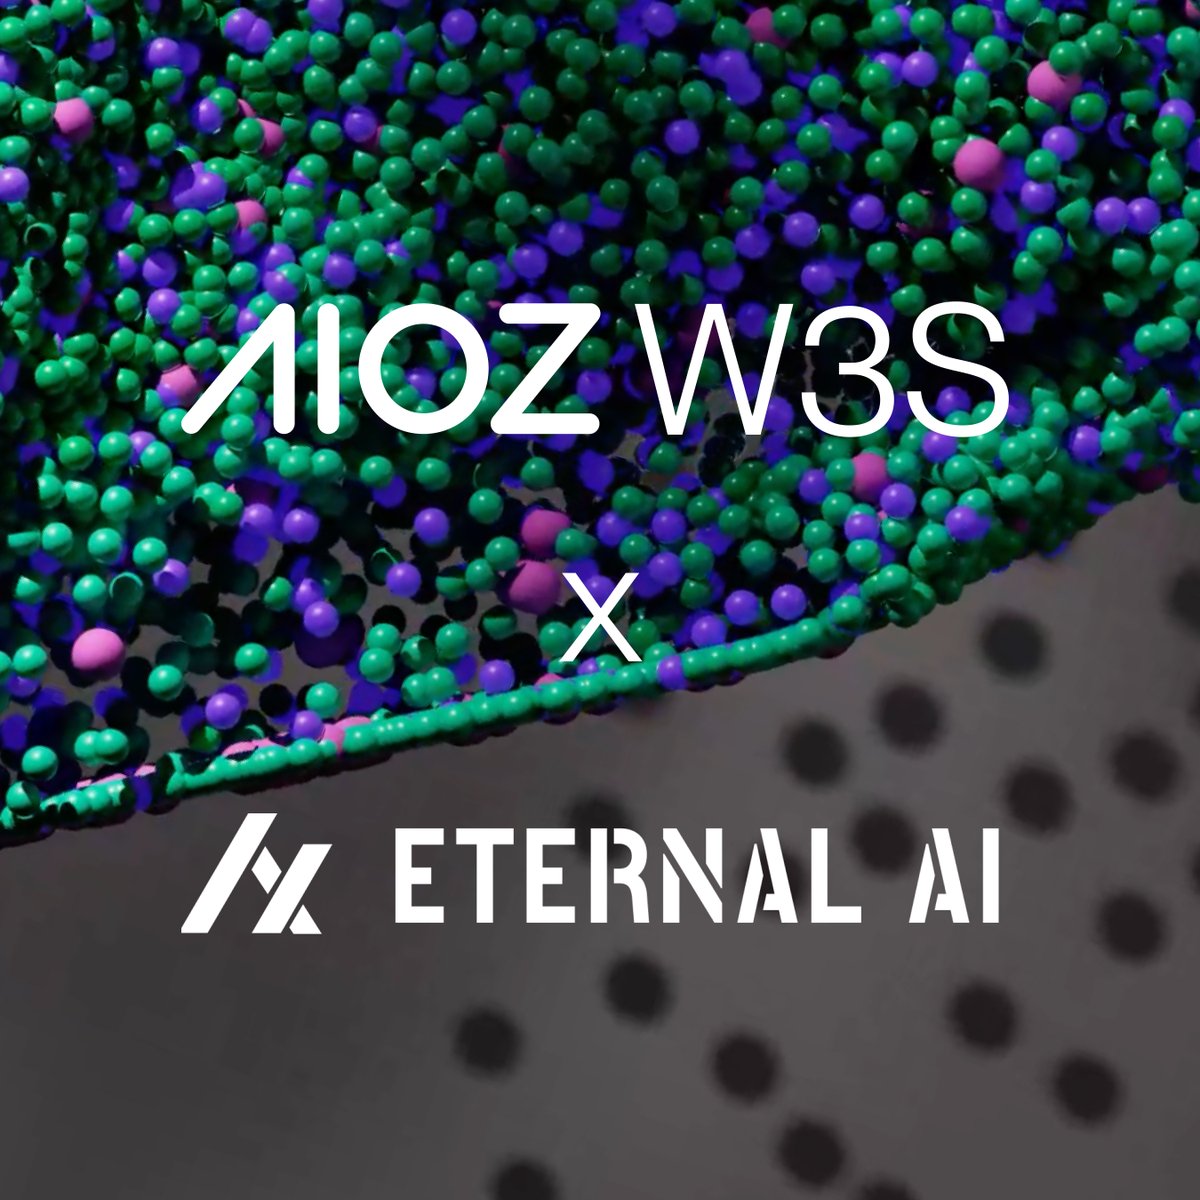 📢 Eternal AI is now integrated with AIOZ #W3S for the decentralized storage of their #AI models, powered by 120K+ AIOZ #DePIN nodes!

@CryptoEternalAI is the first #Bitcoin L2 designed for decentralized AI, enabling anyone to create and power decentralized AI. 🚀

The